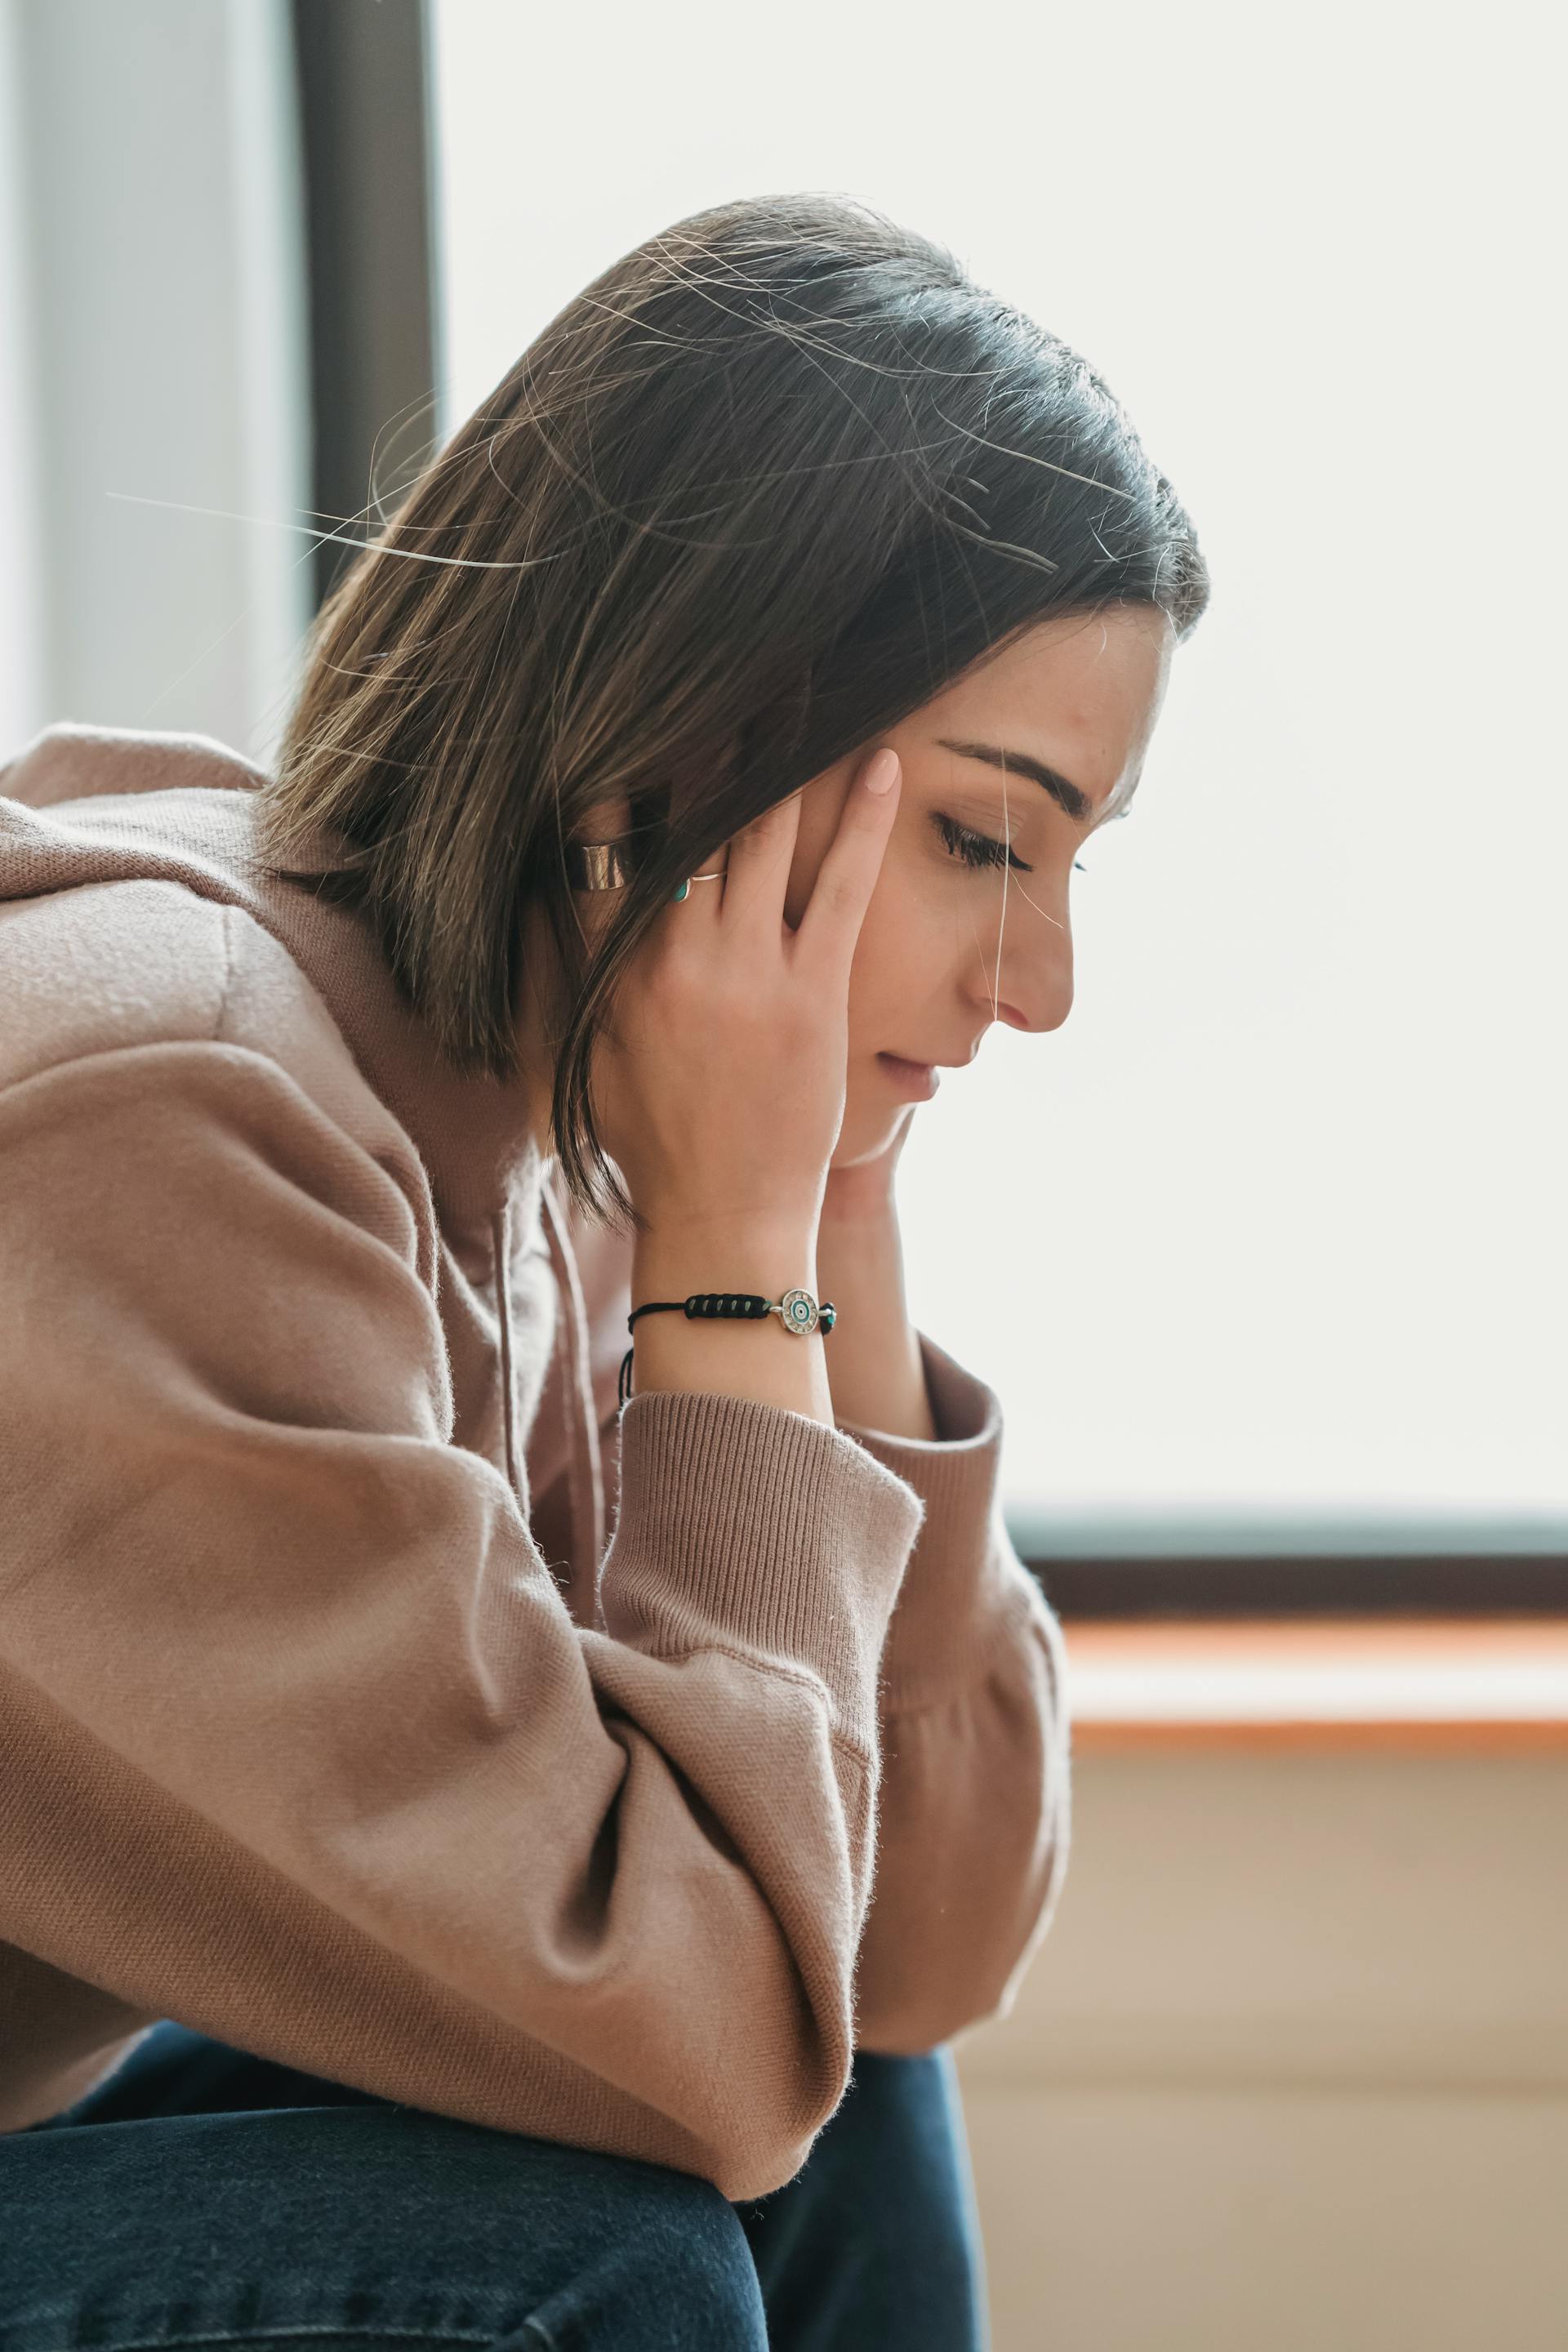 A sad woman sitting with her hands on her head | Source: Pexels